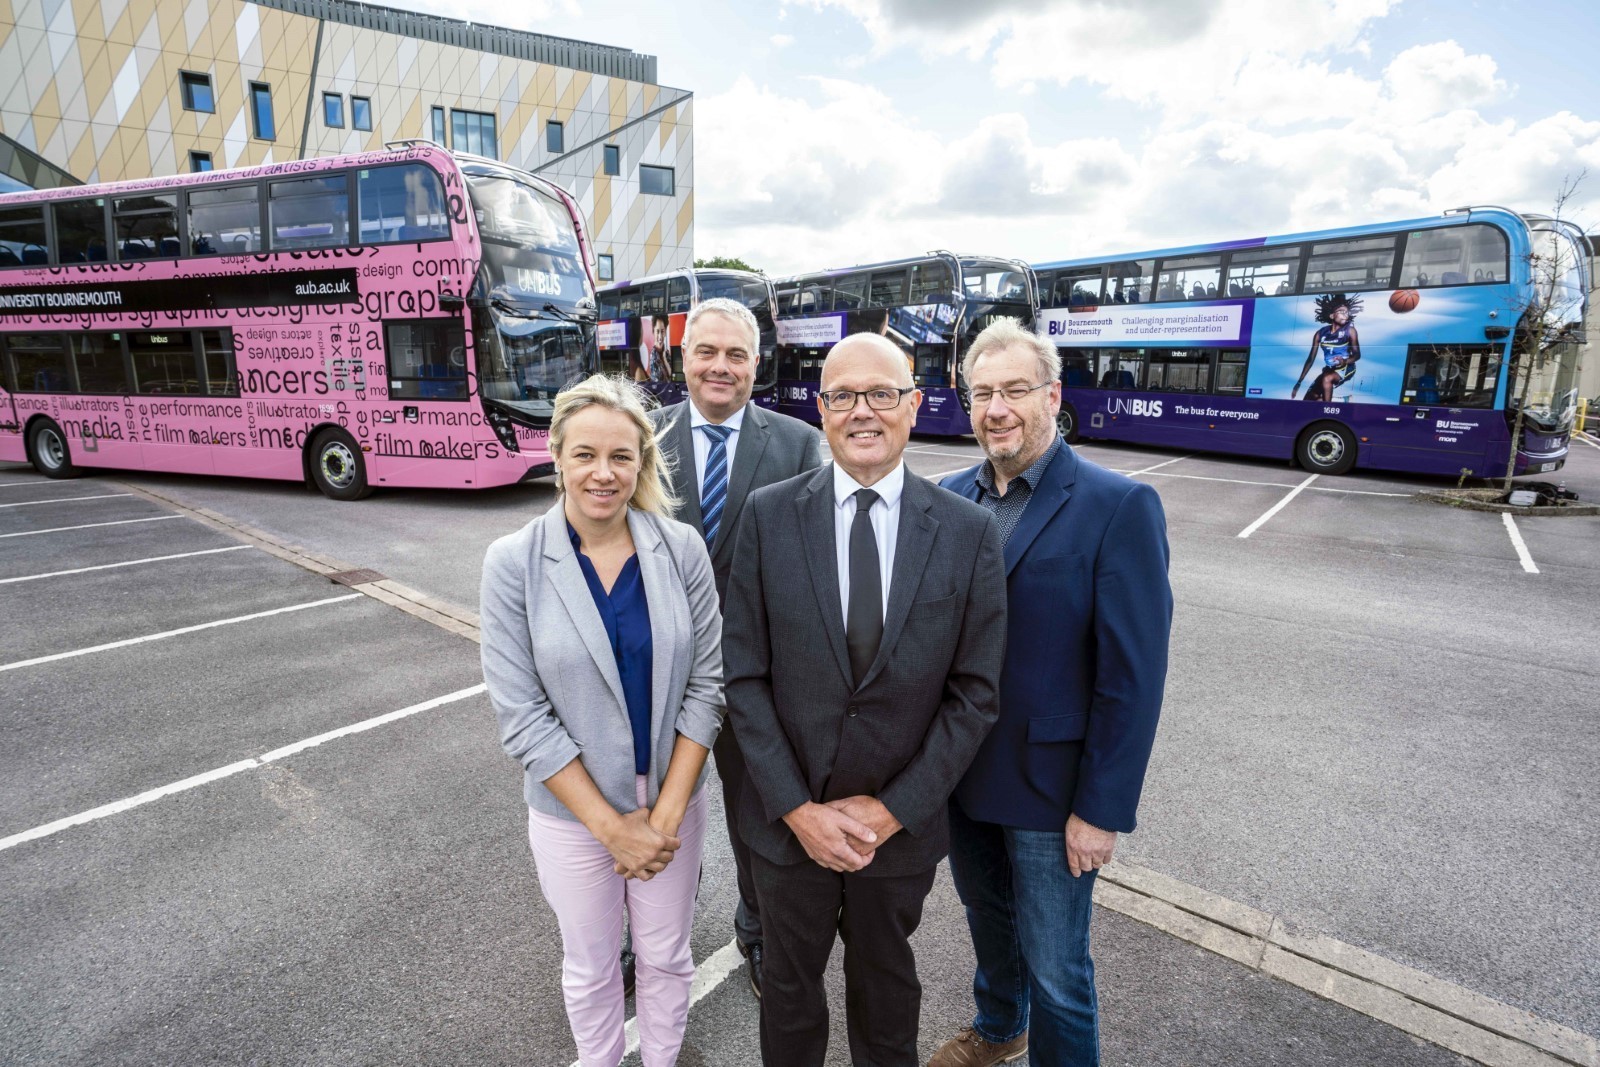 Lois Betts, Sustainability Manager at Bournemouth University; Jim Andrews, Chief Operating Officer at Bournemouth University; Andrew Wickham, Morebus Managing Director Manager and Stephen Harvey, Executive Director of Operations & Planning at Arts University Bournemouth.  